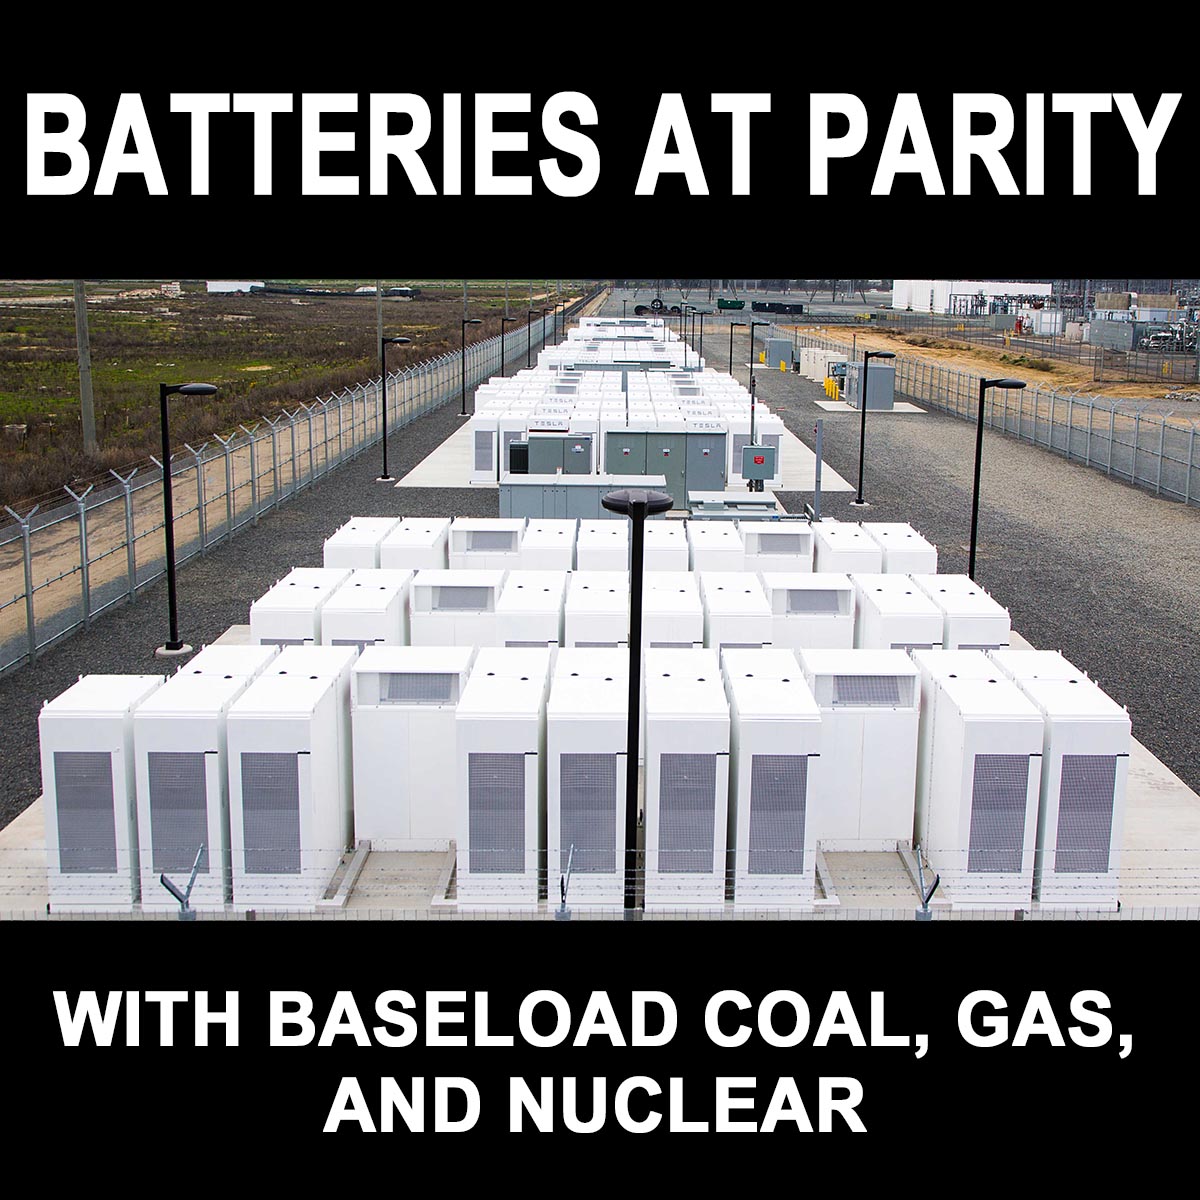 Batteries at Parity With Baseload Coal, Gas and Nuclear